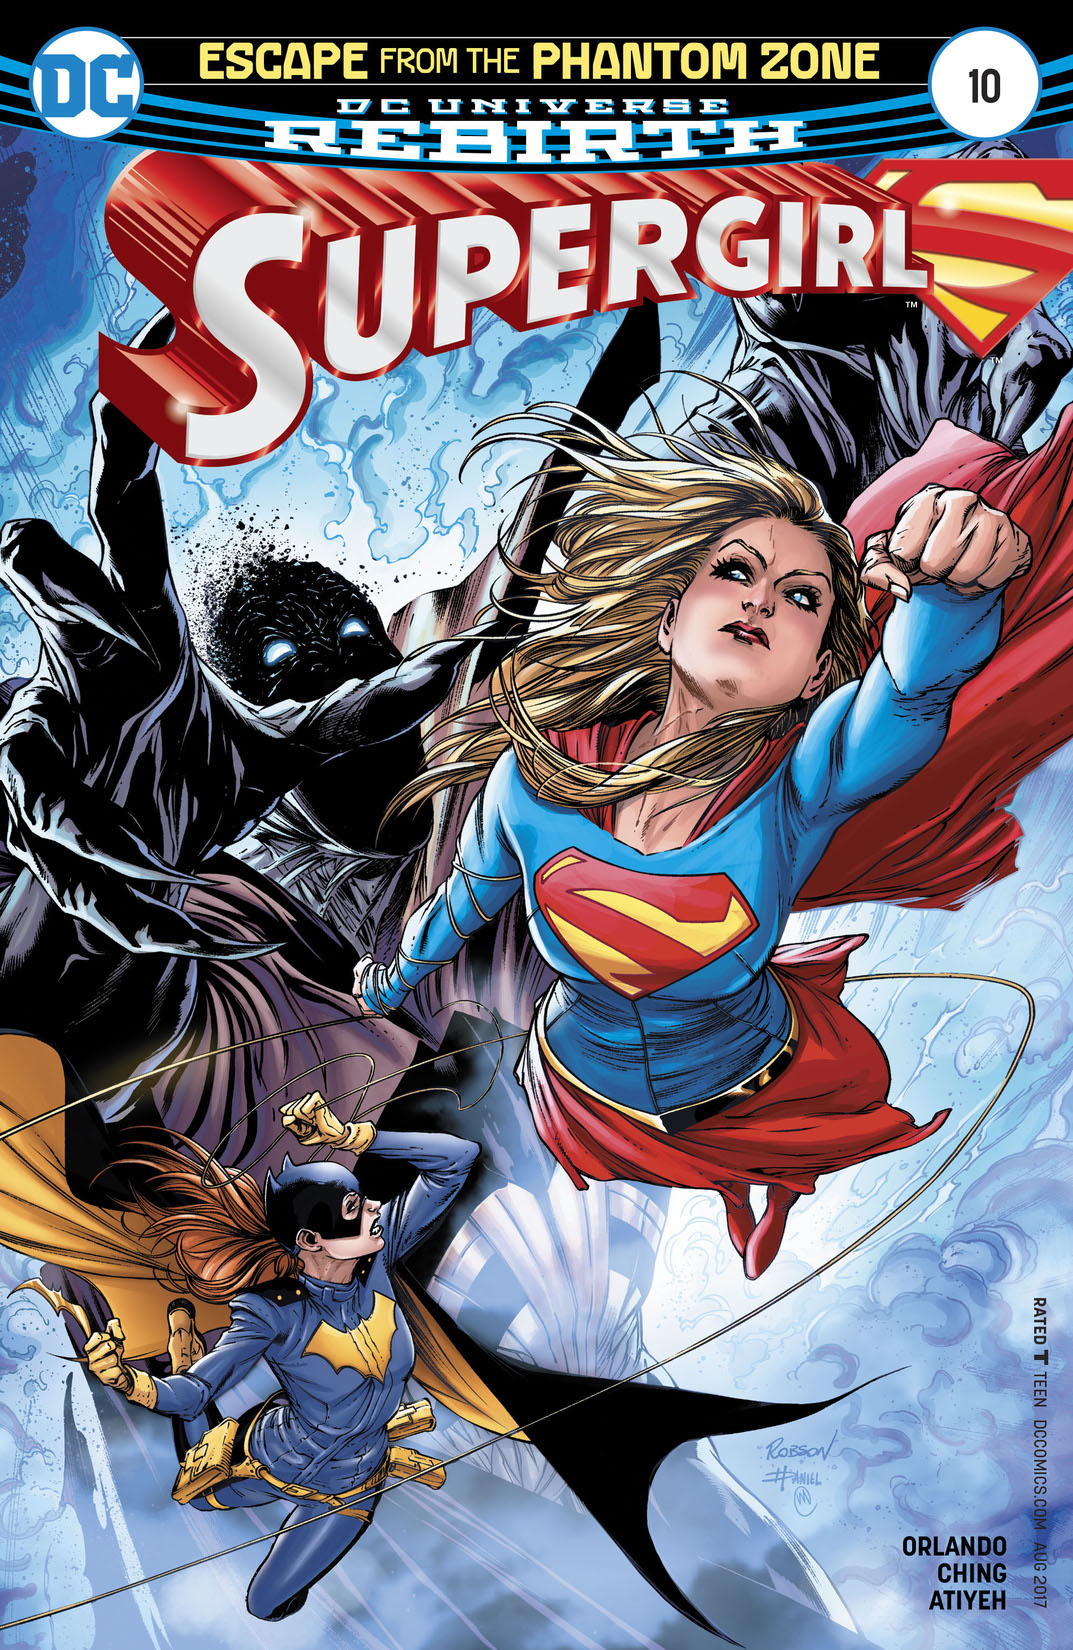 Supergirl (2016-) #10 preview images